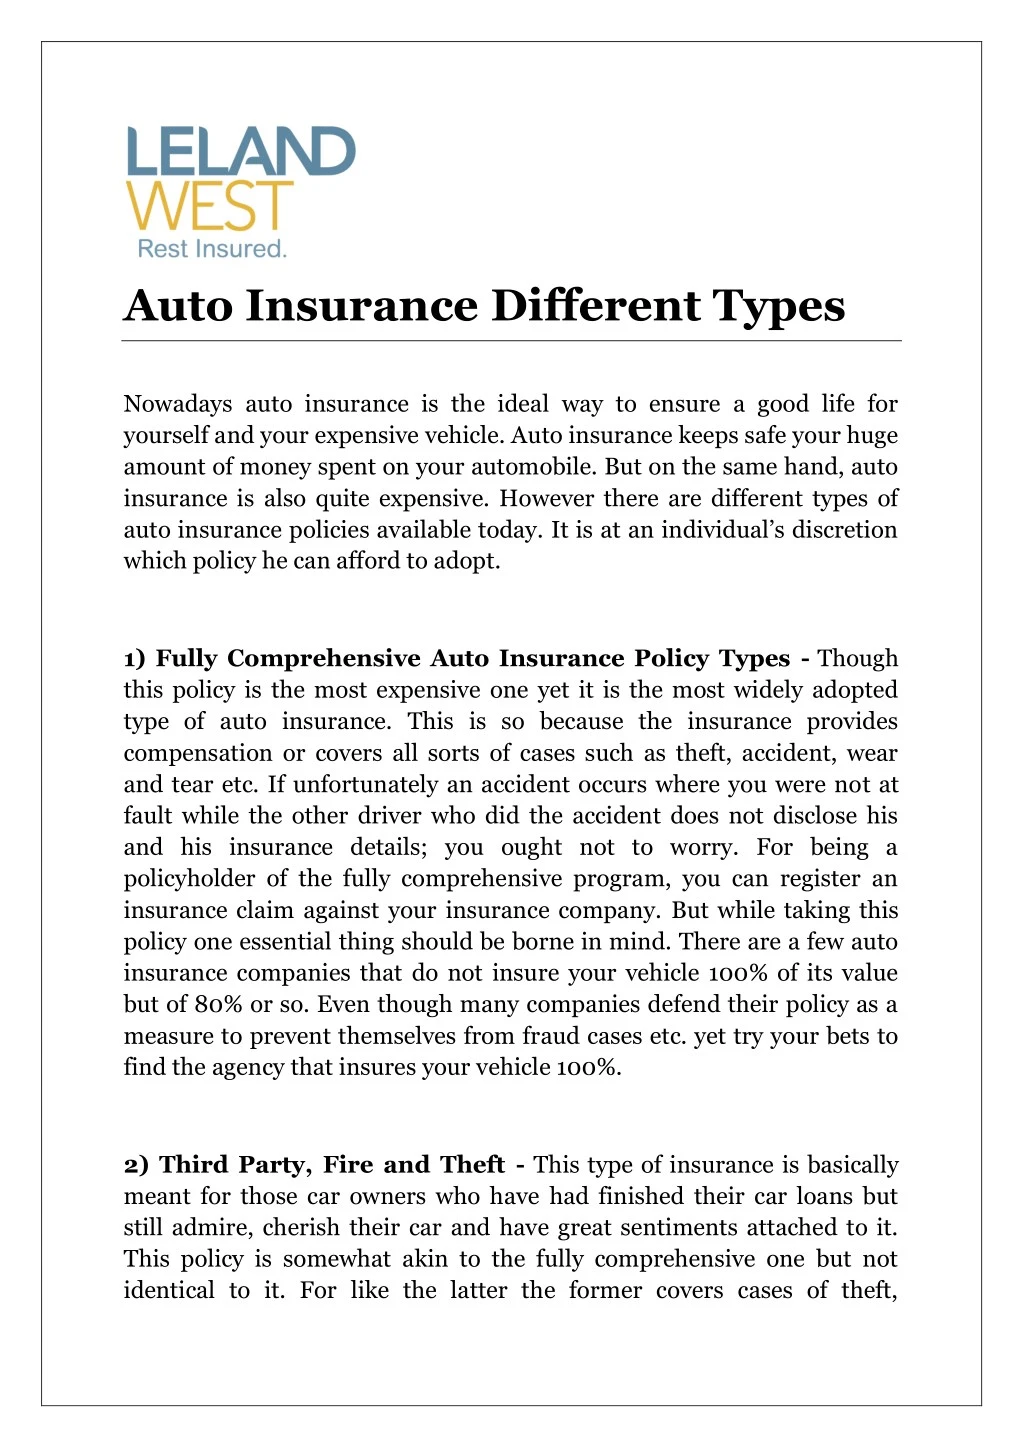 auto insurance different types